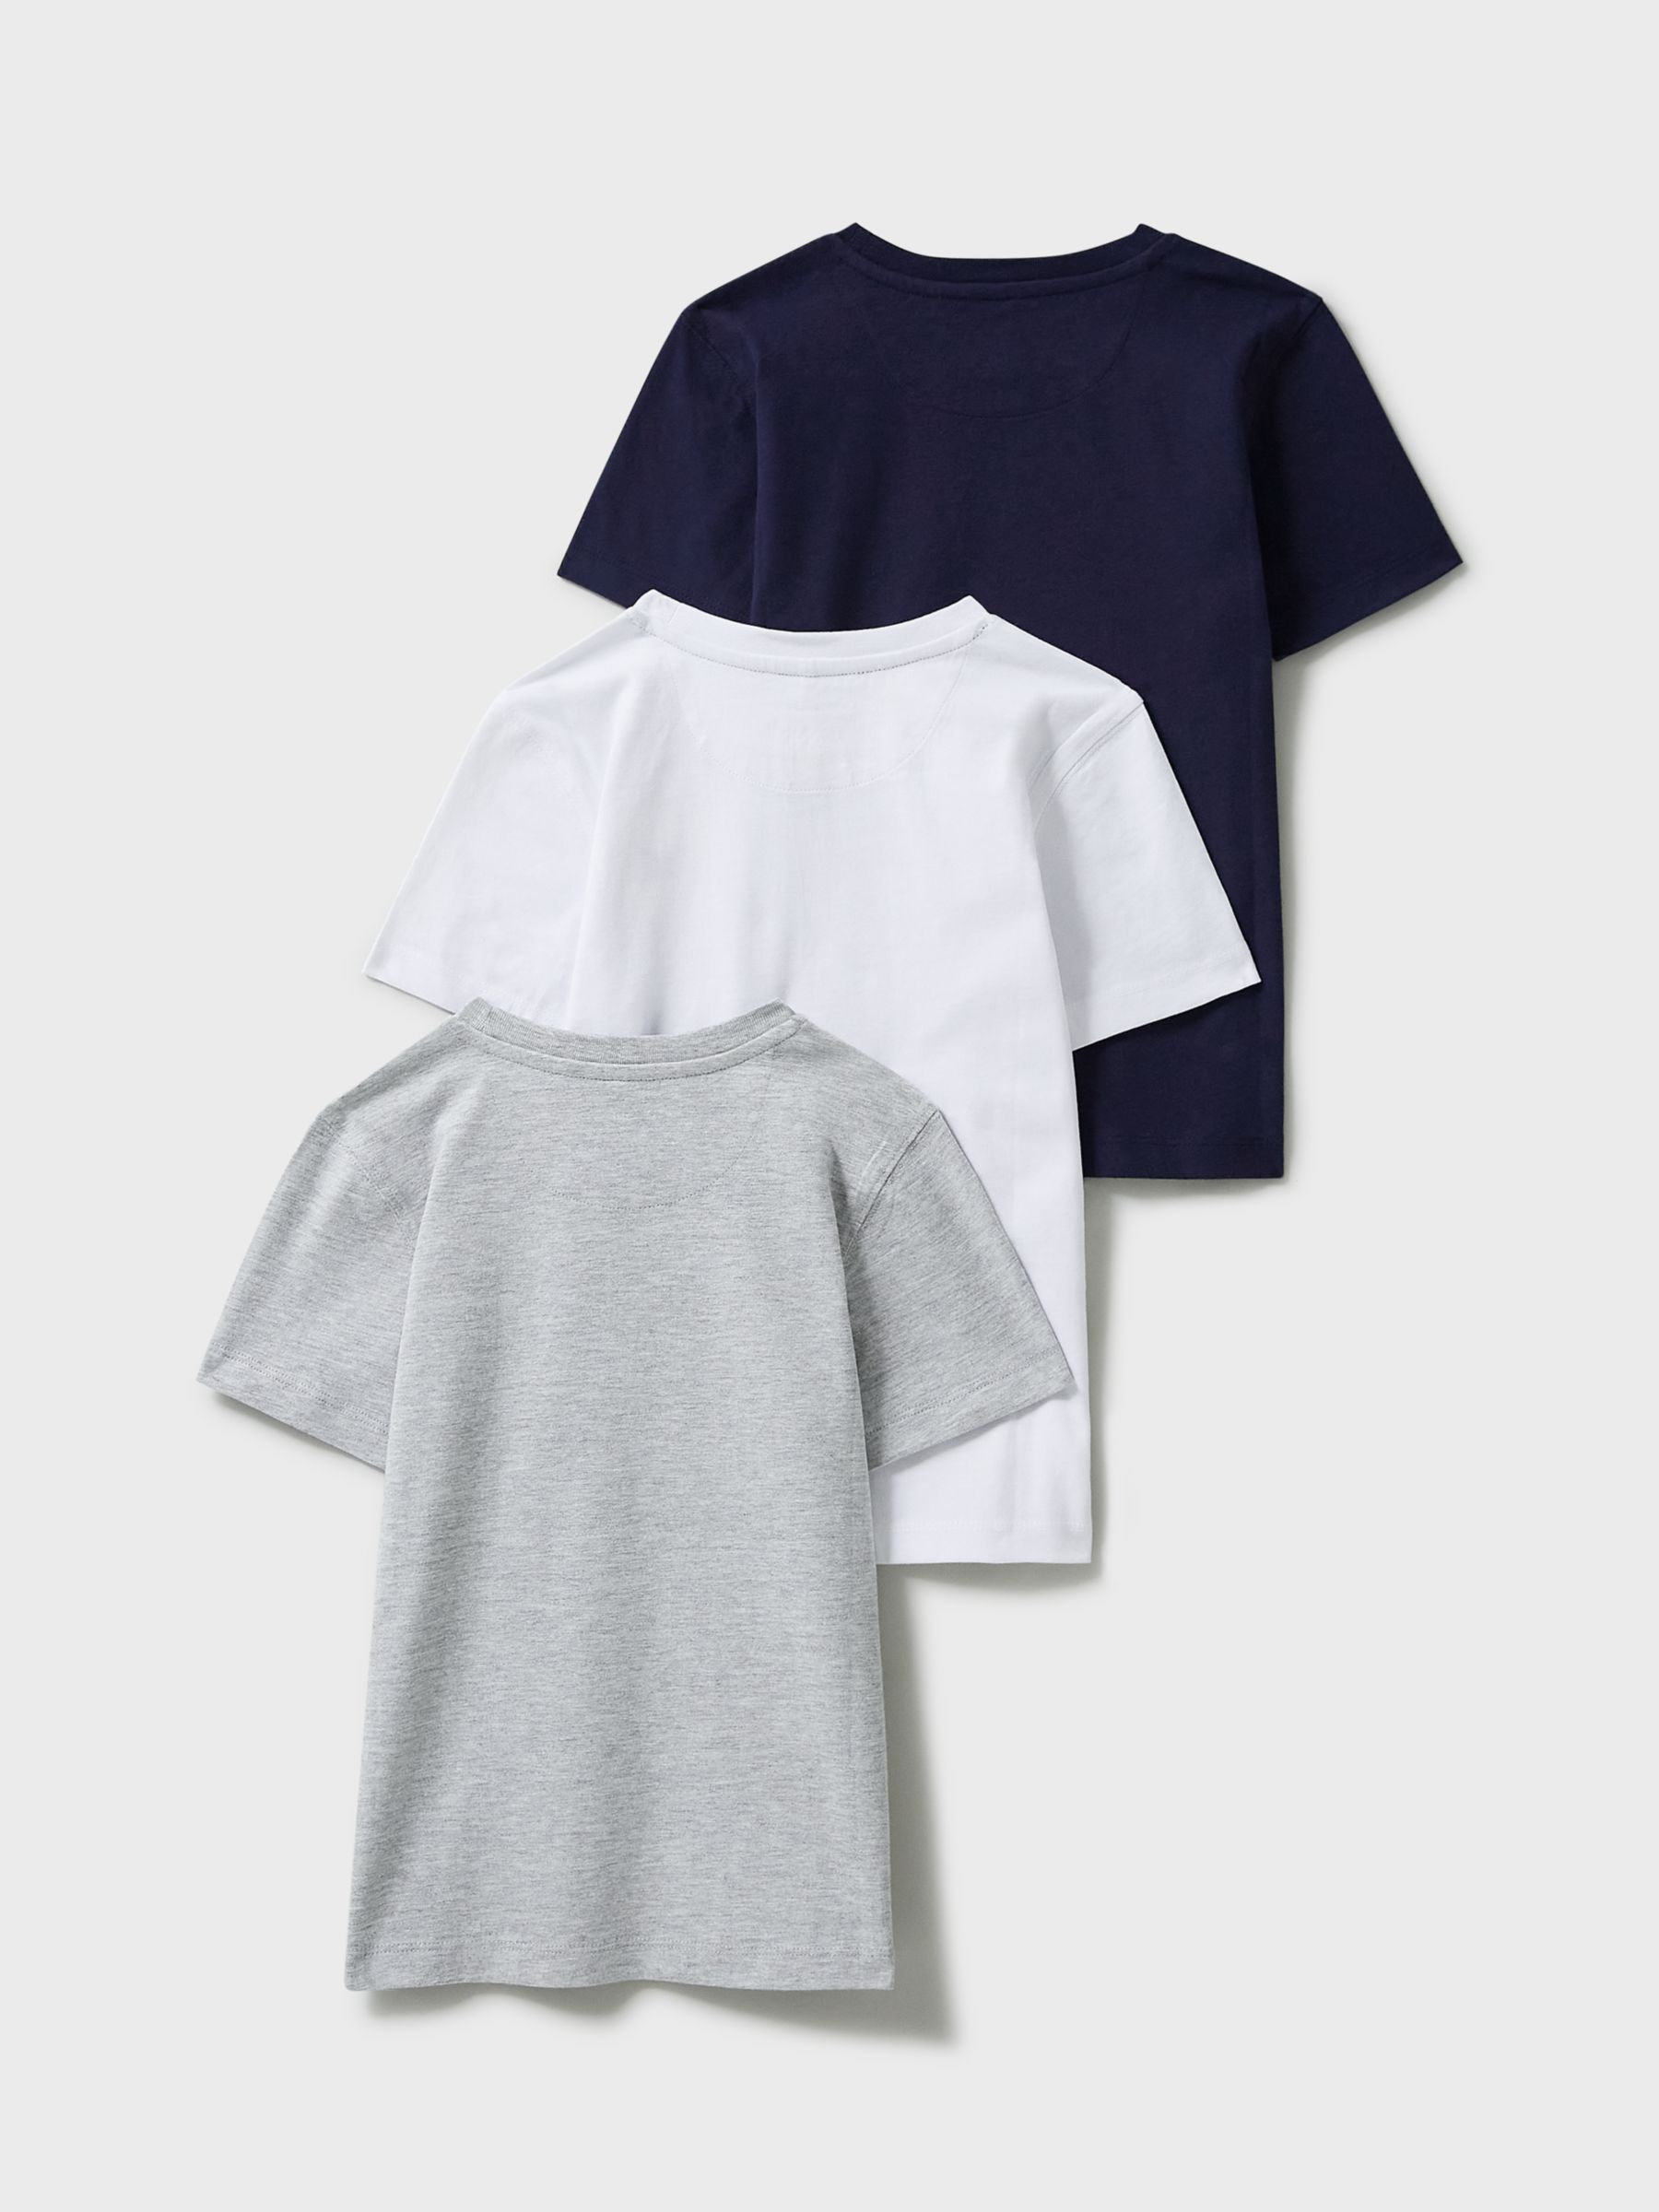 Crew Clothing Kids' Plain Cotton T-Shirts, Pack of 3, Grey/White/Navy, 3-4 years